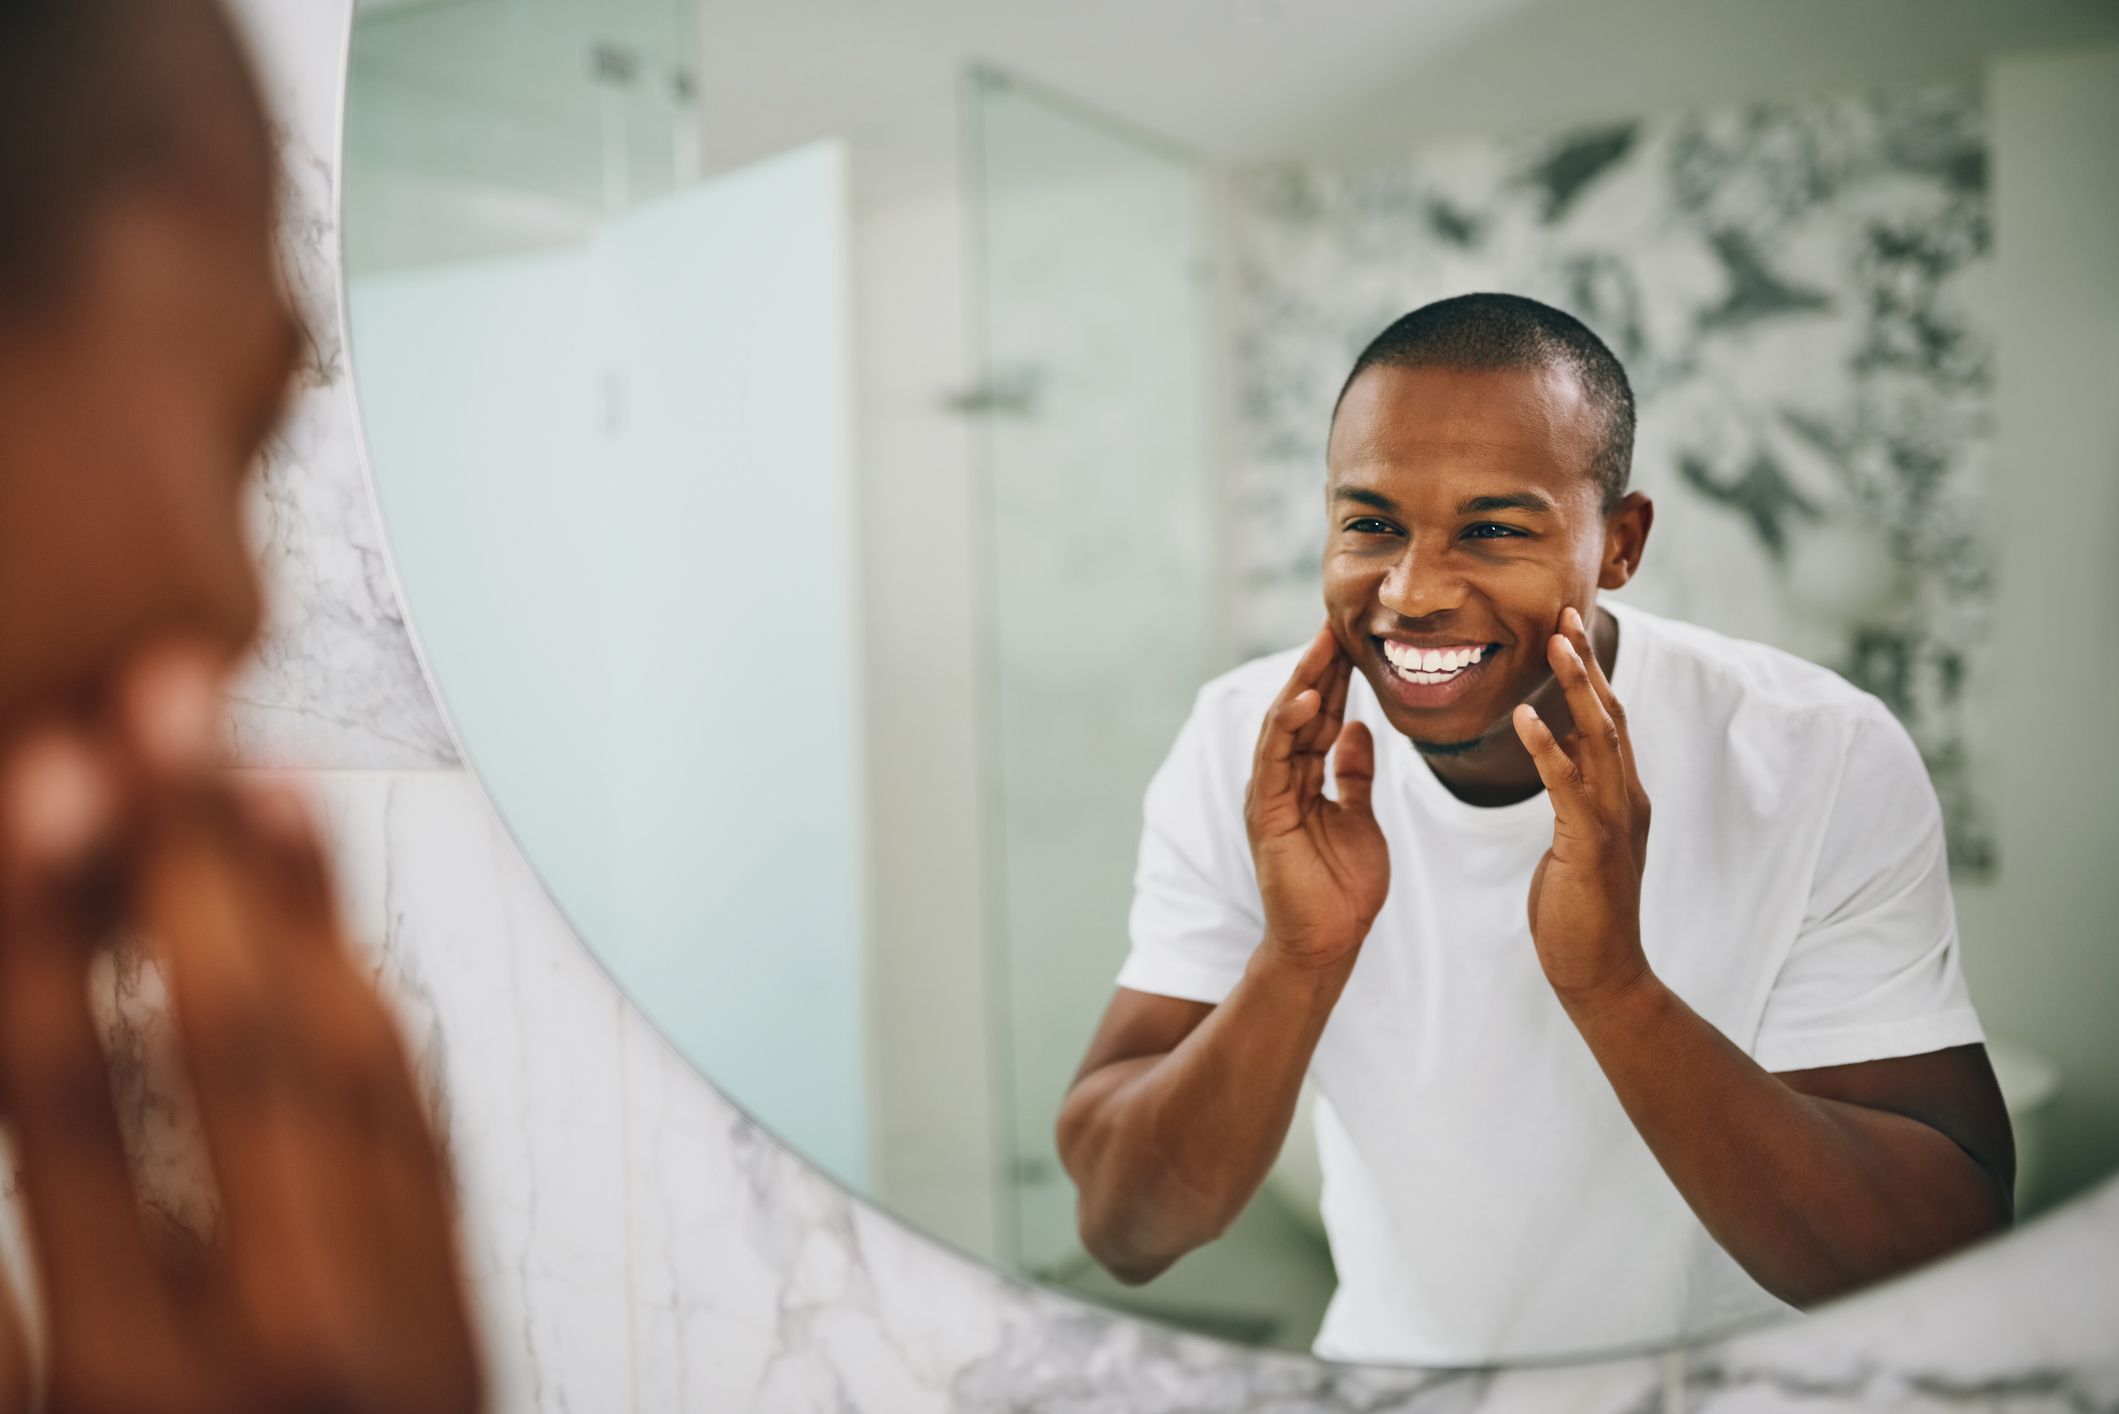 A man smiling in a mirror; Getty Images